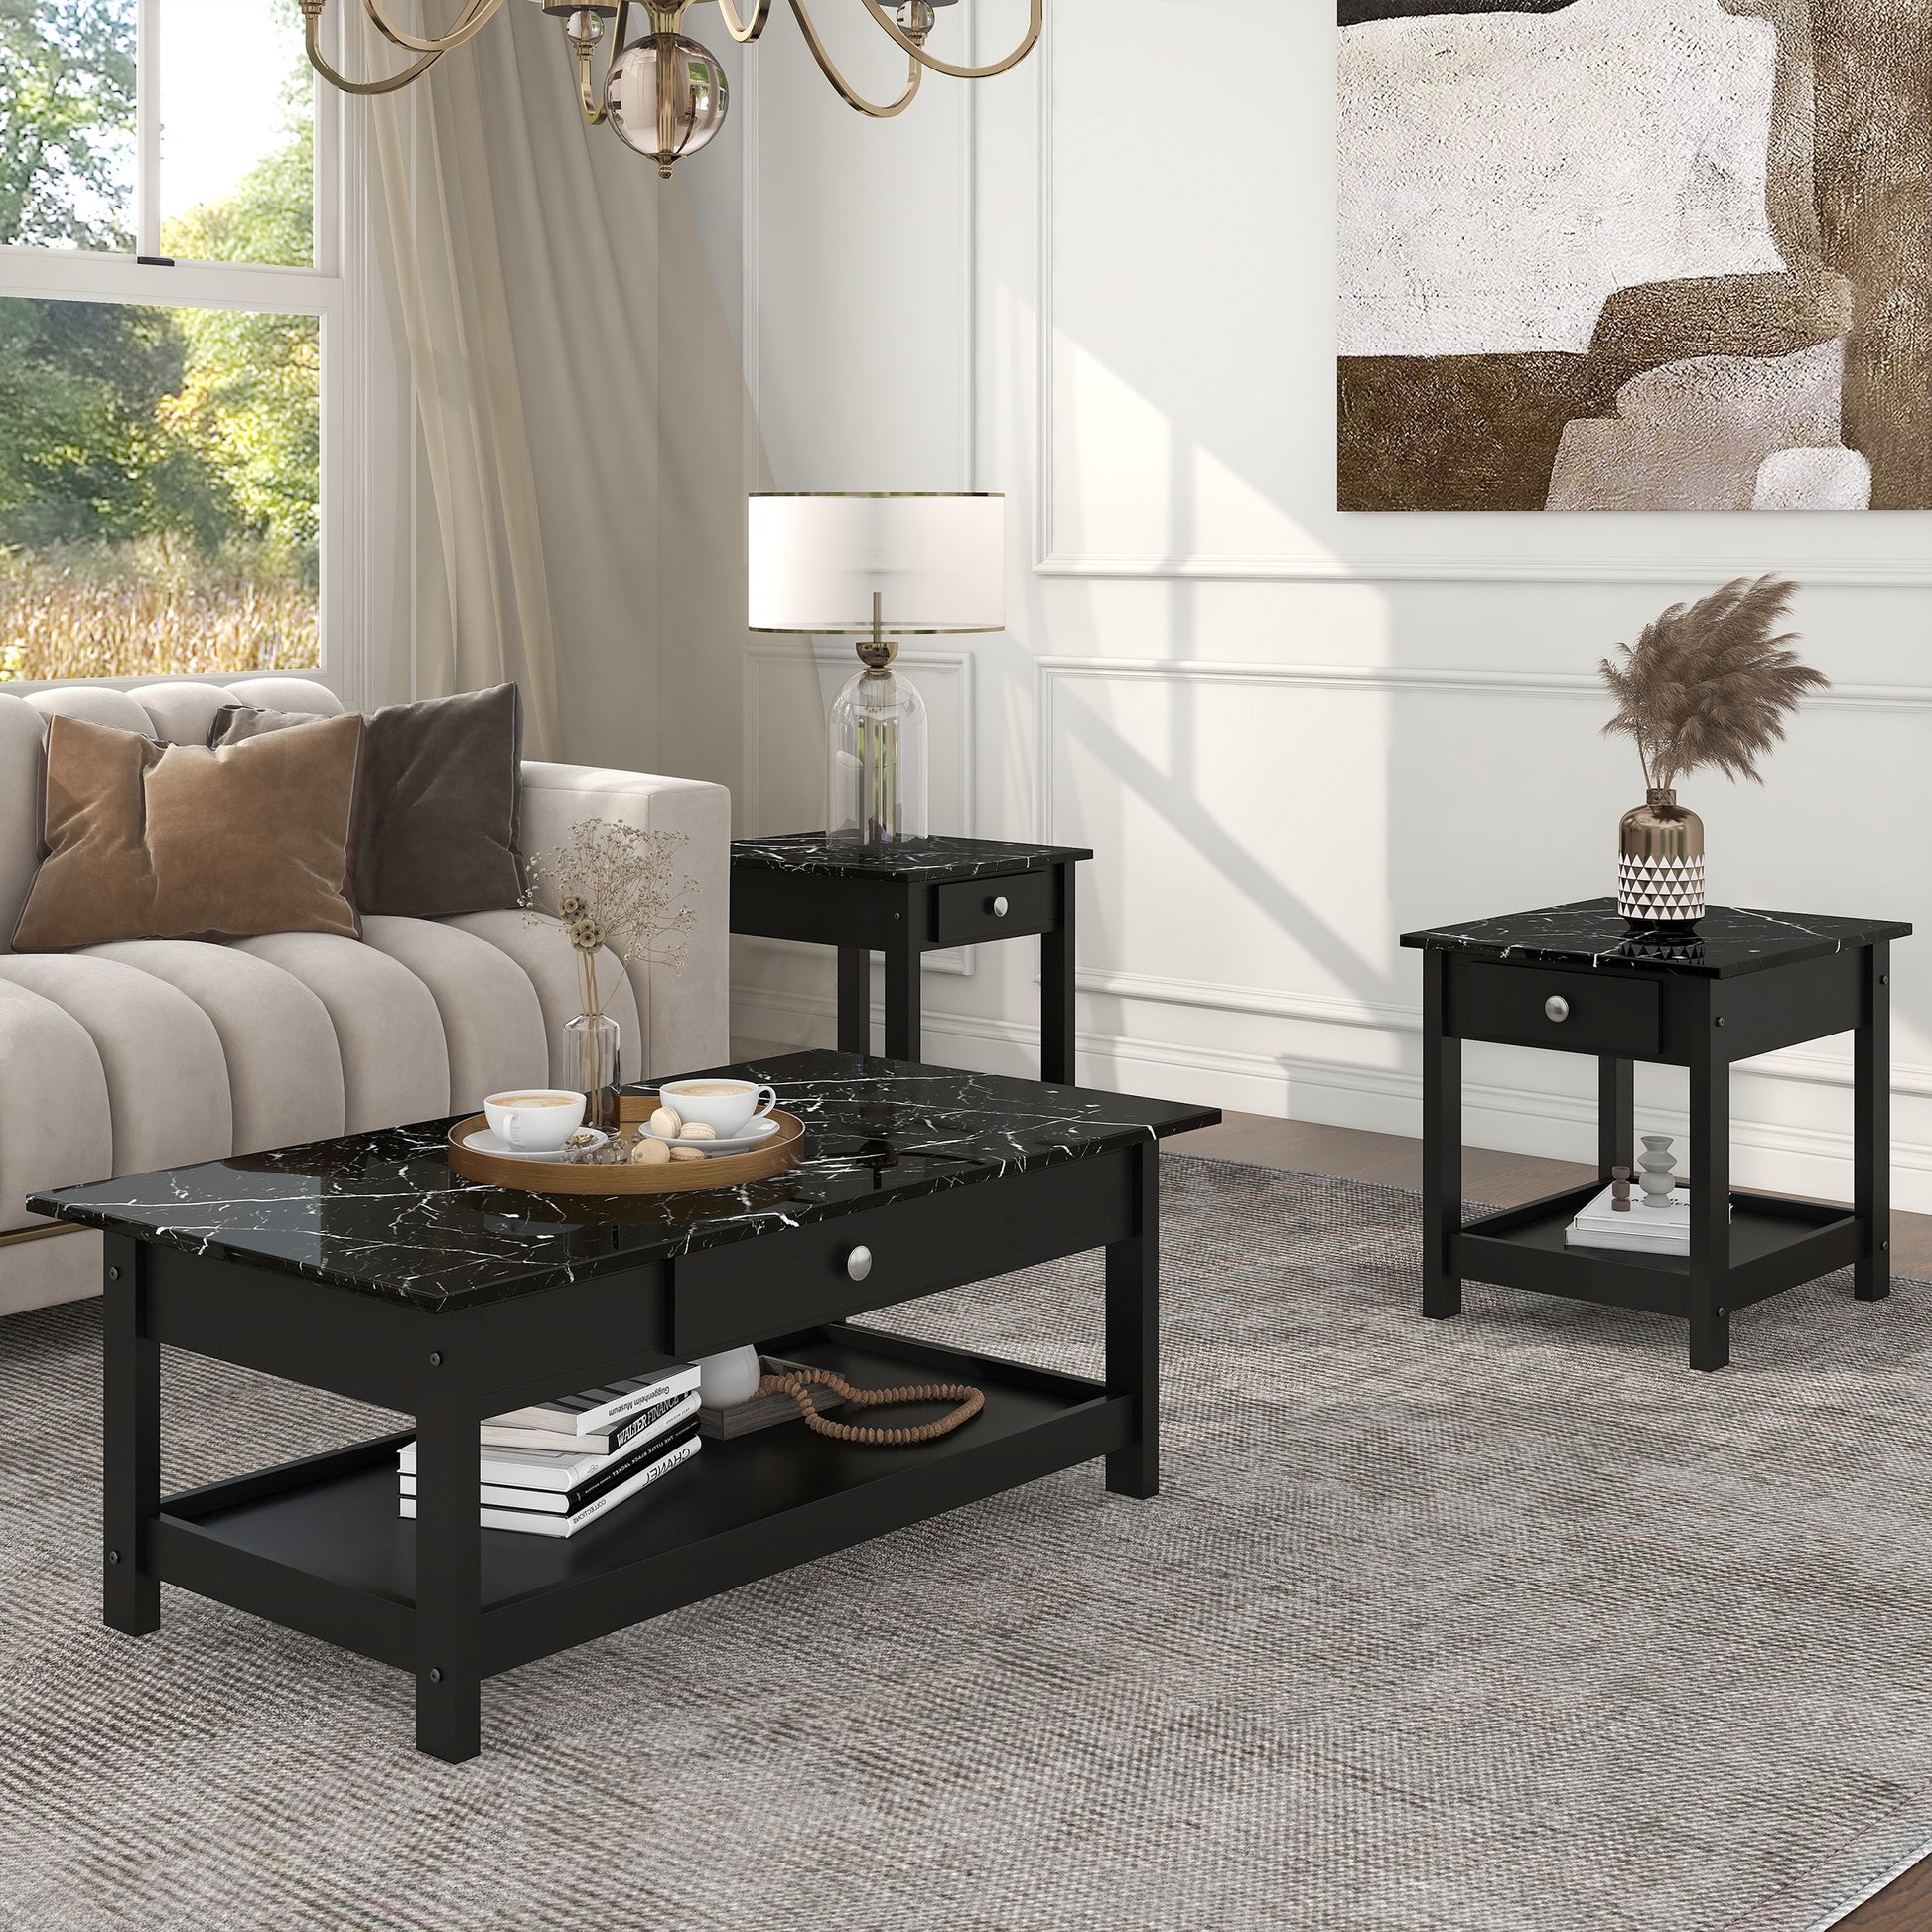 Right angled three-piece modern black and faux marble coffee table set with lower shelves in a living area with accessories